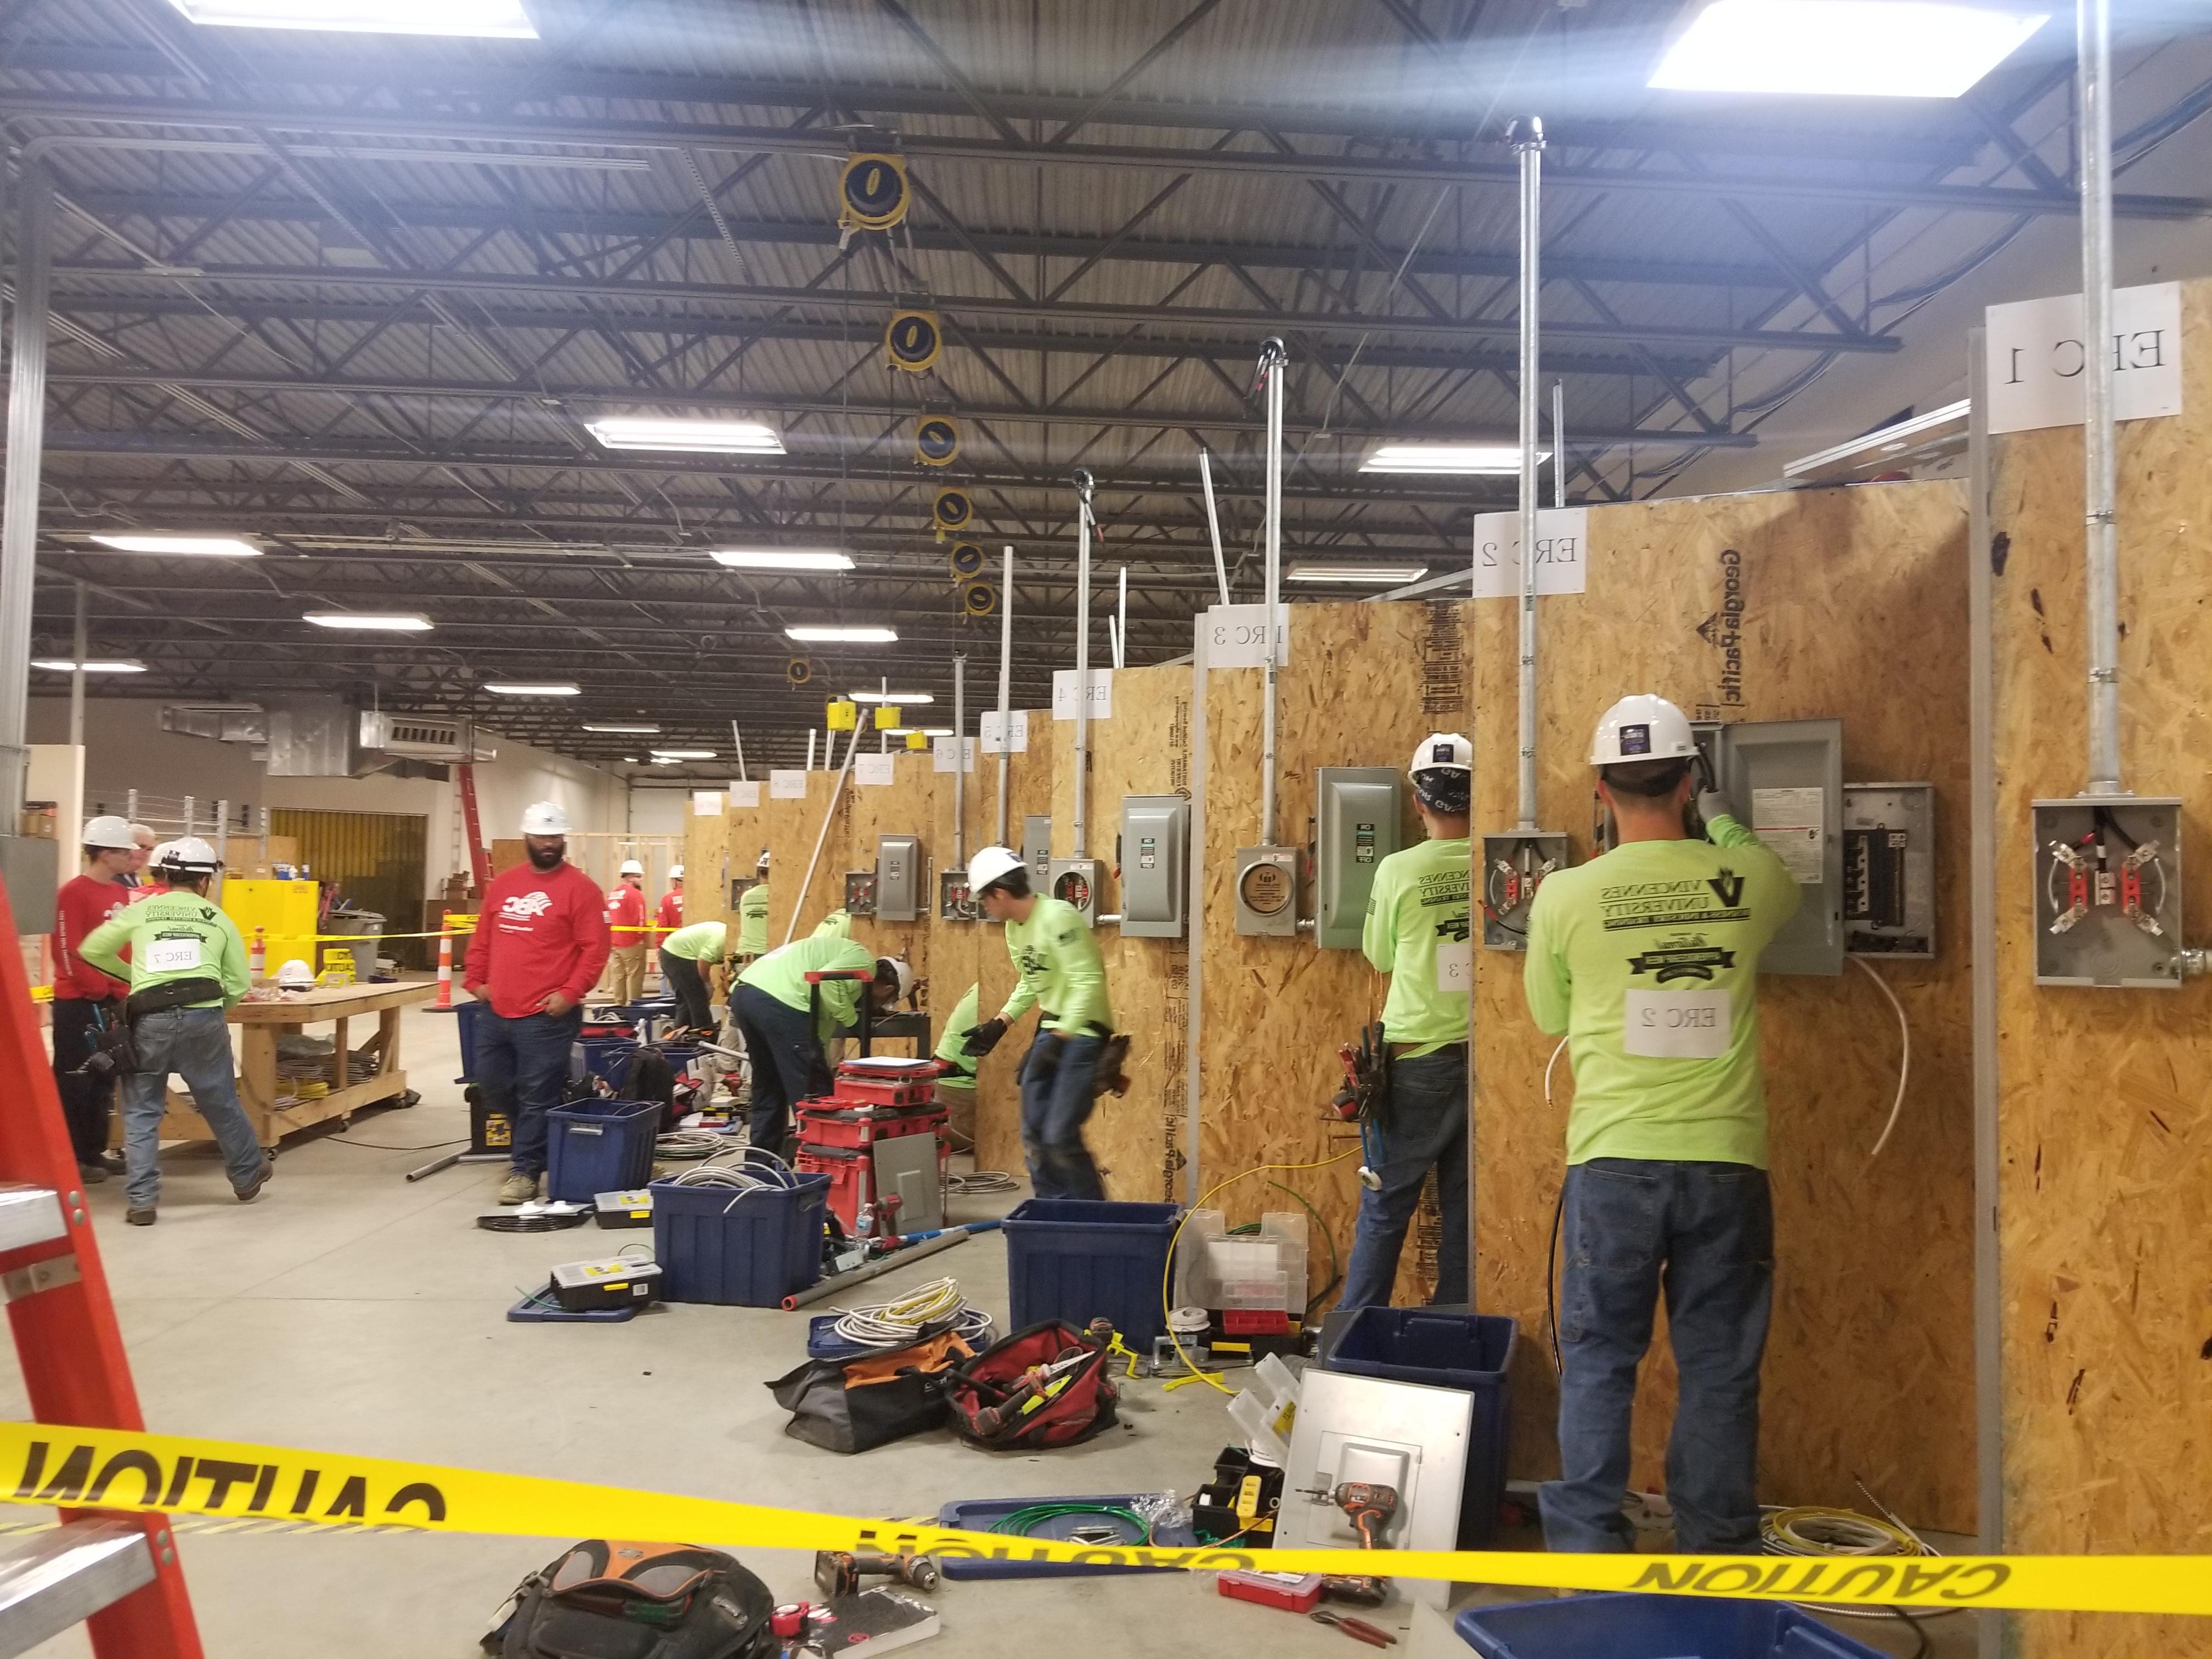 People in hard hats work at individual electrical panels with equipment around them while Instructors look on.